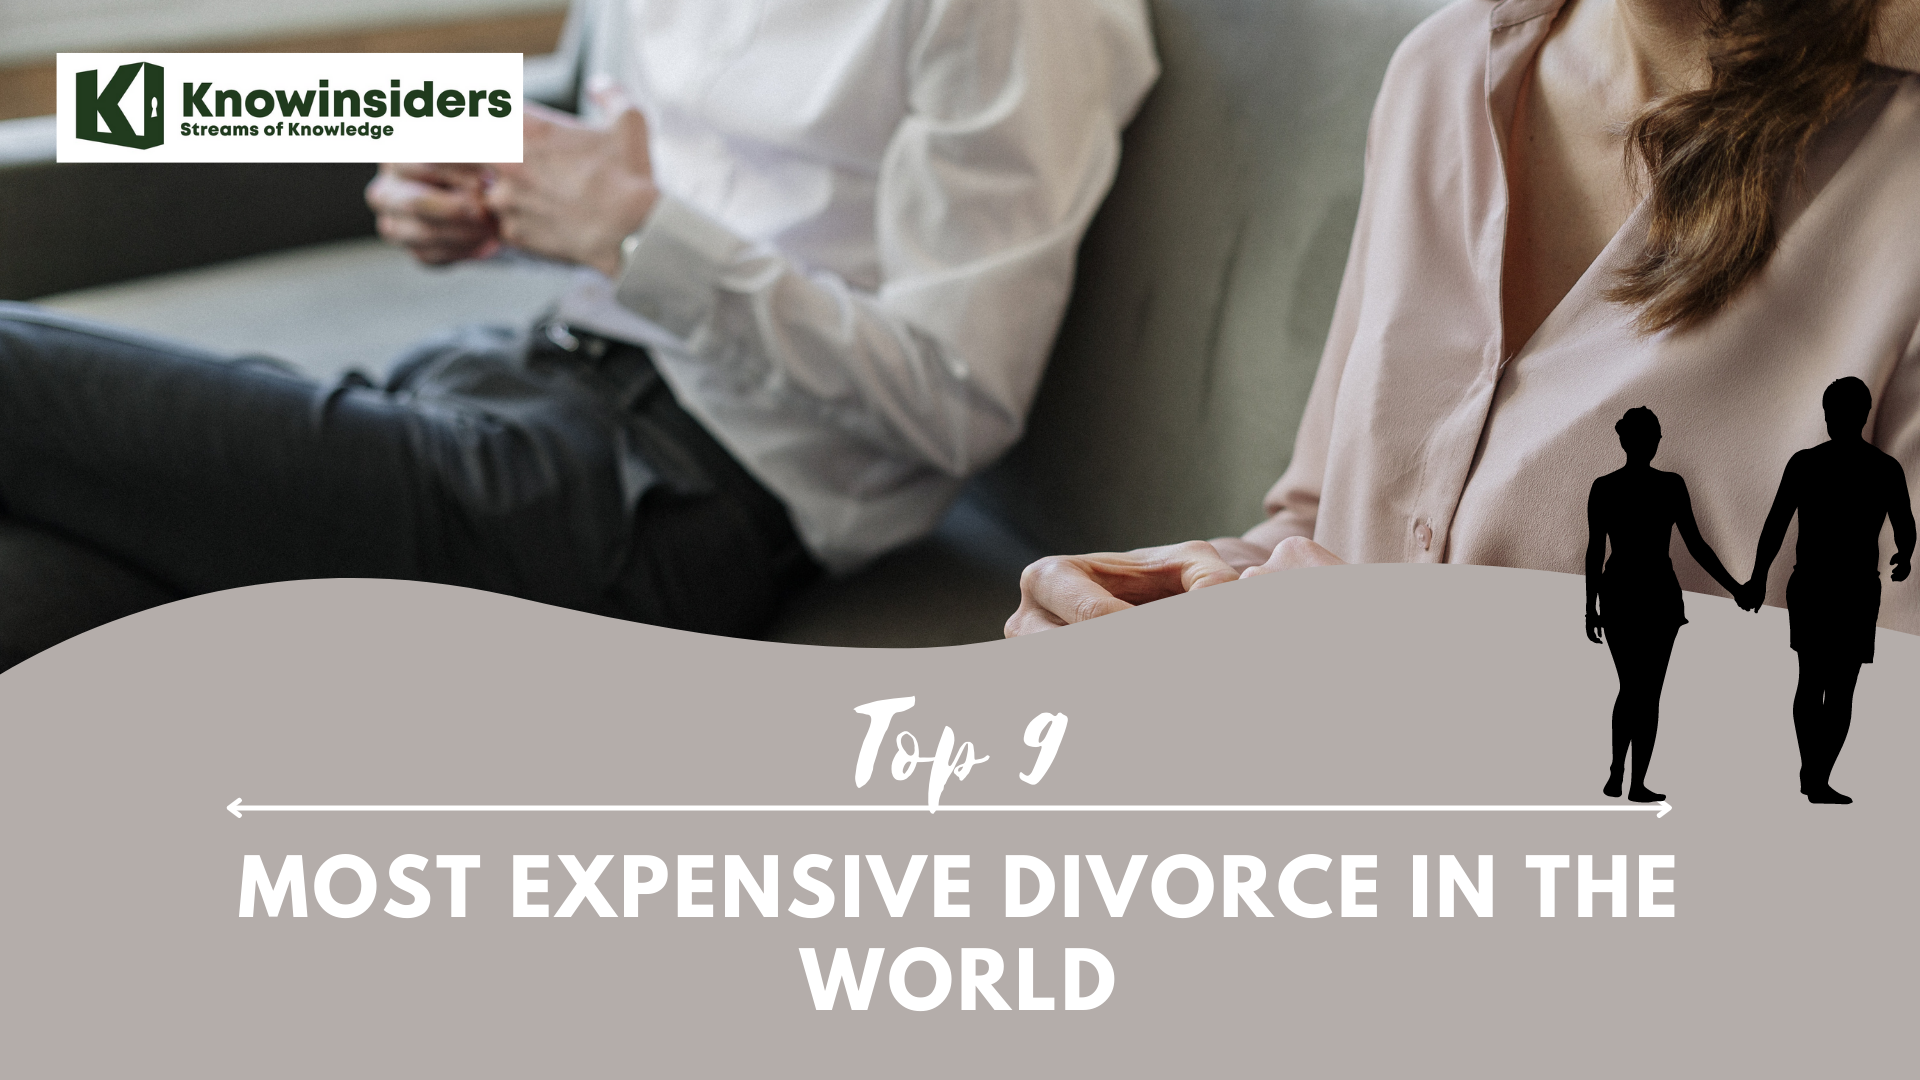 Top 9 Most Expensive Divorces In the World